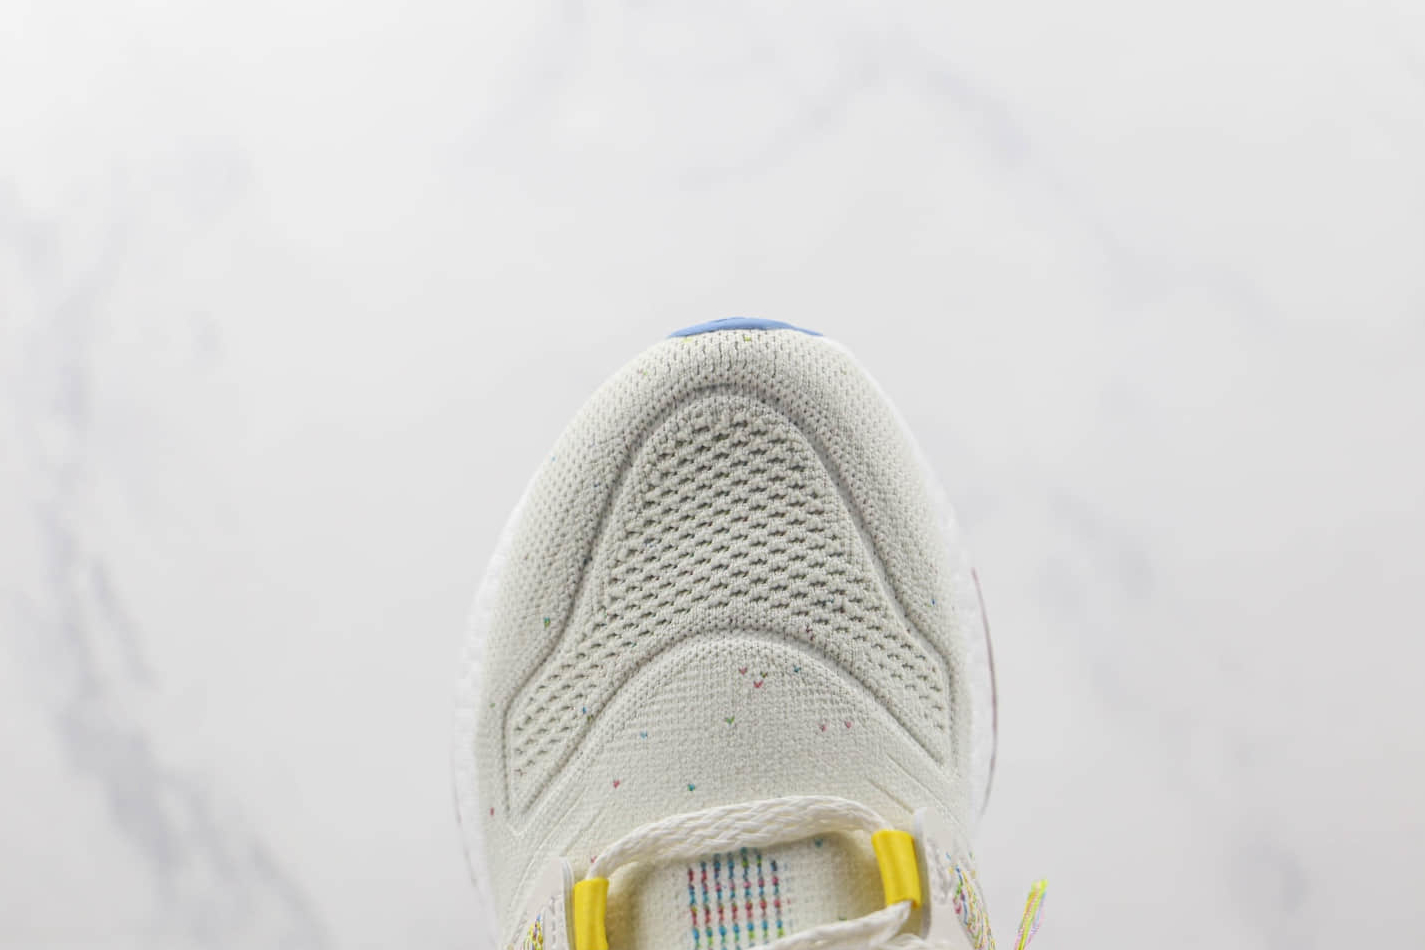 Adidas UltraBoost 22 Sus White Light Yellow - HQ3731 | Exclusive Release